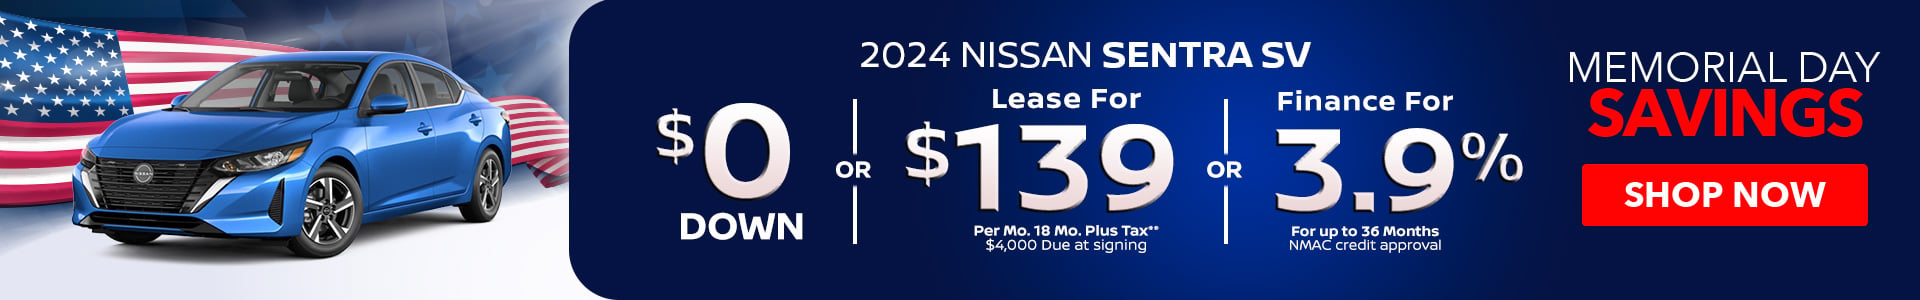 2024 Nissan Sentra - Lease for $139